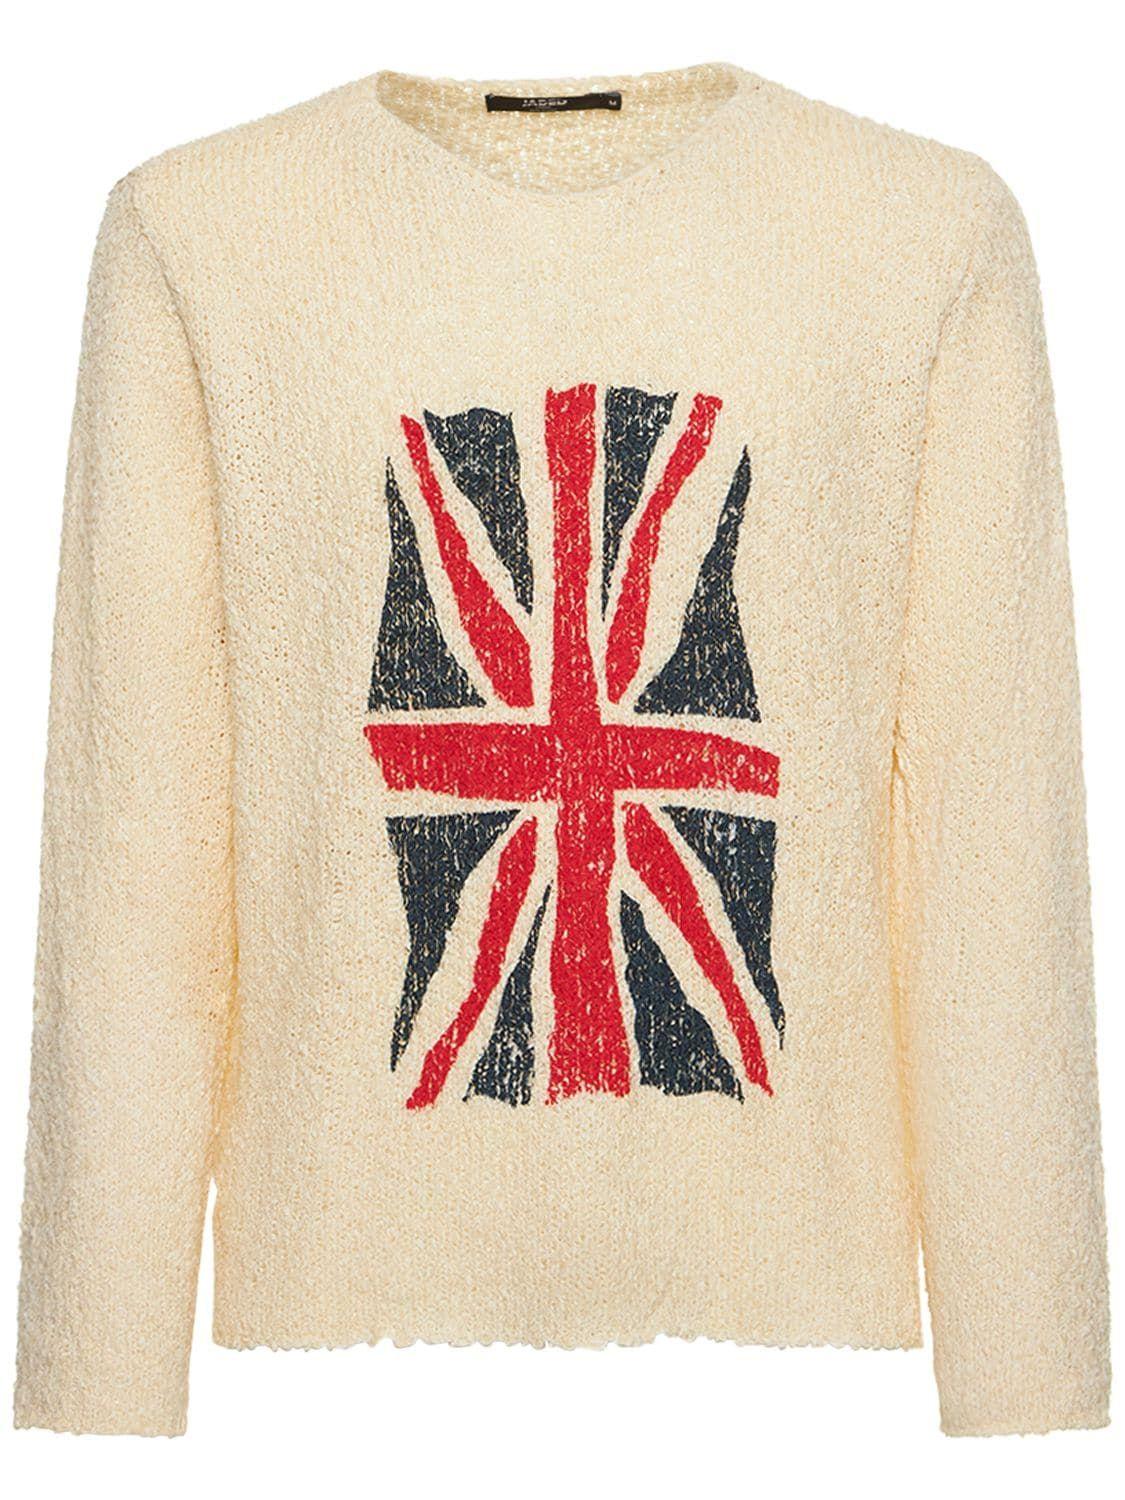 Jaded London Union Jack Jacquard Knit Sweater in White for Men | Lyst